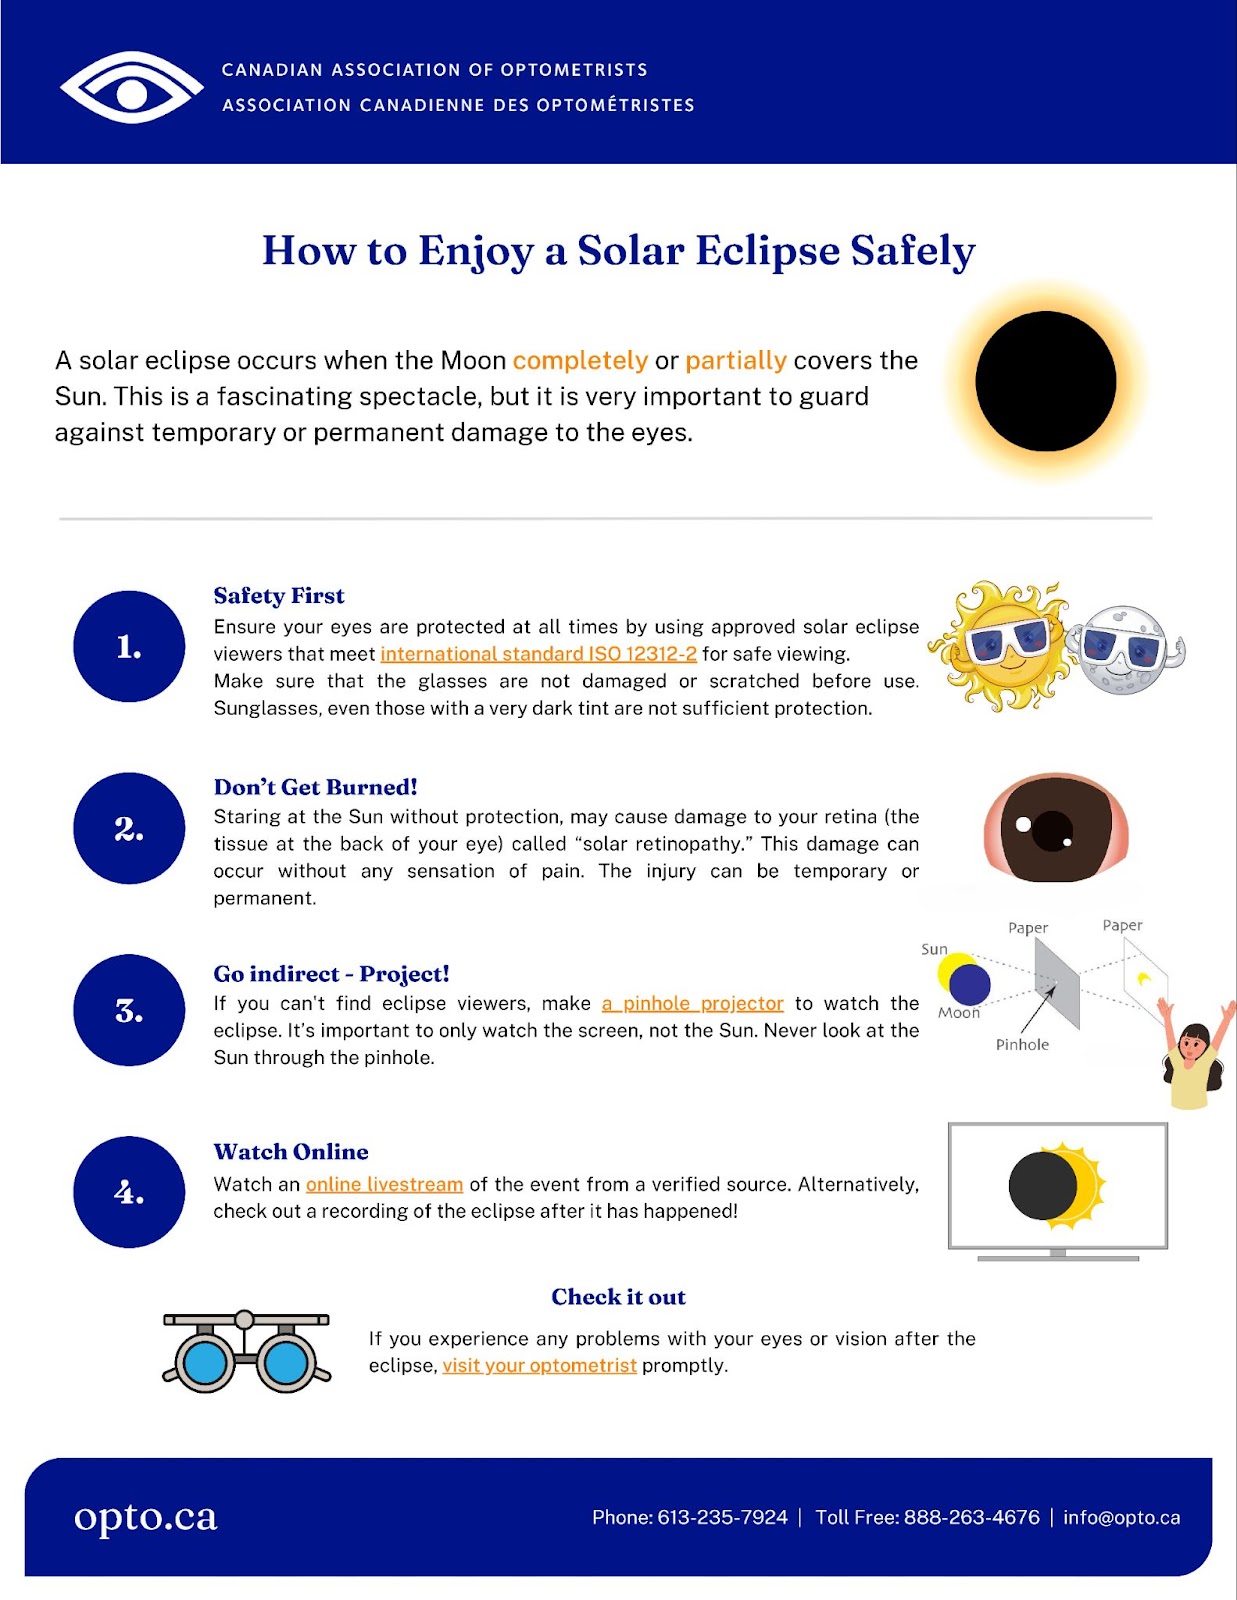 An image describing ways to keep your eyes safe during a solar eclipse. It's important to protect your eyes from direct sun rays by either wearing eclipse glasses or creating a pinhole projector